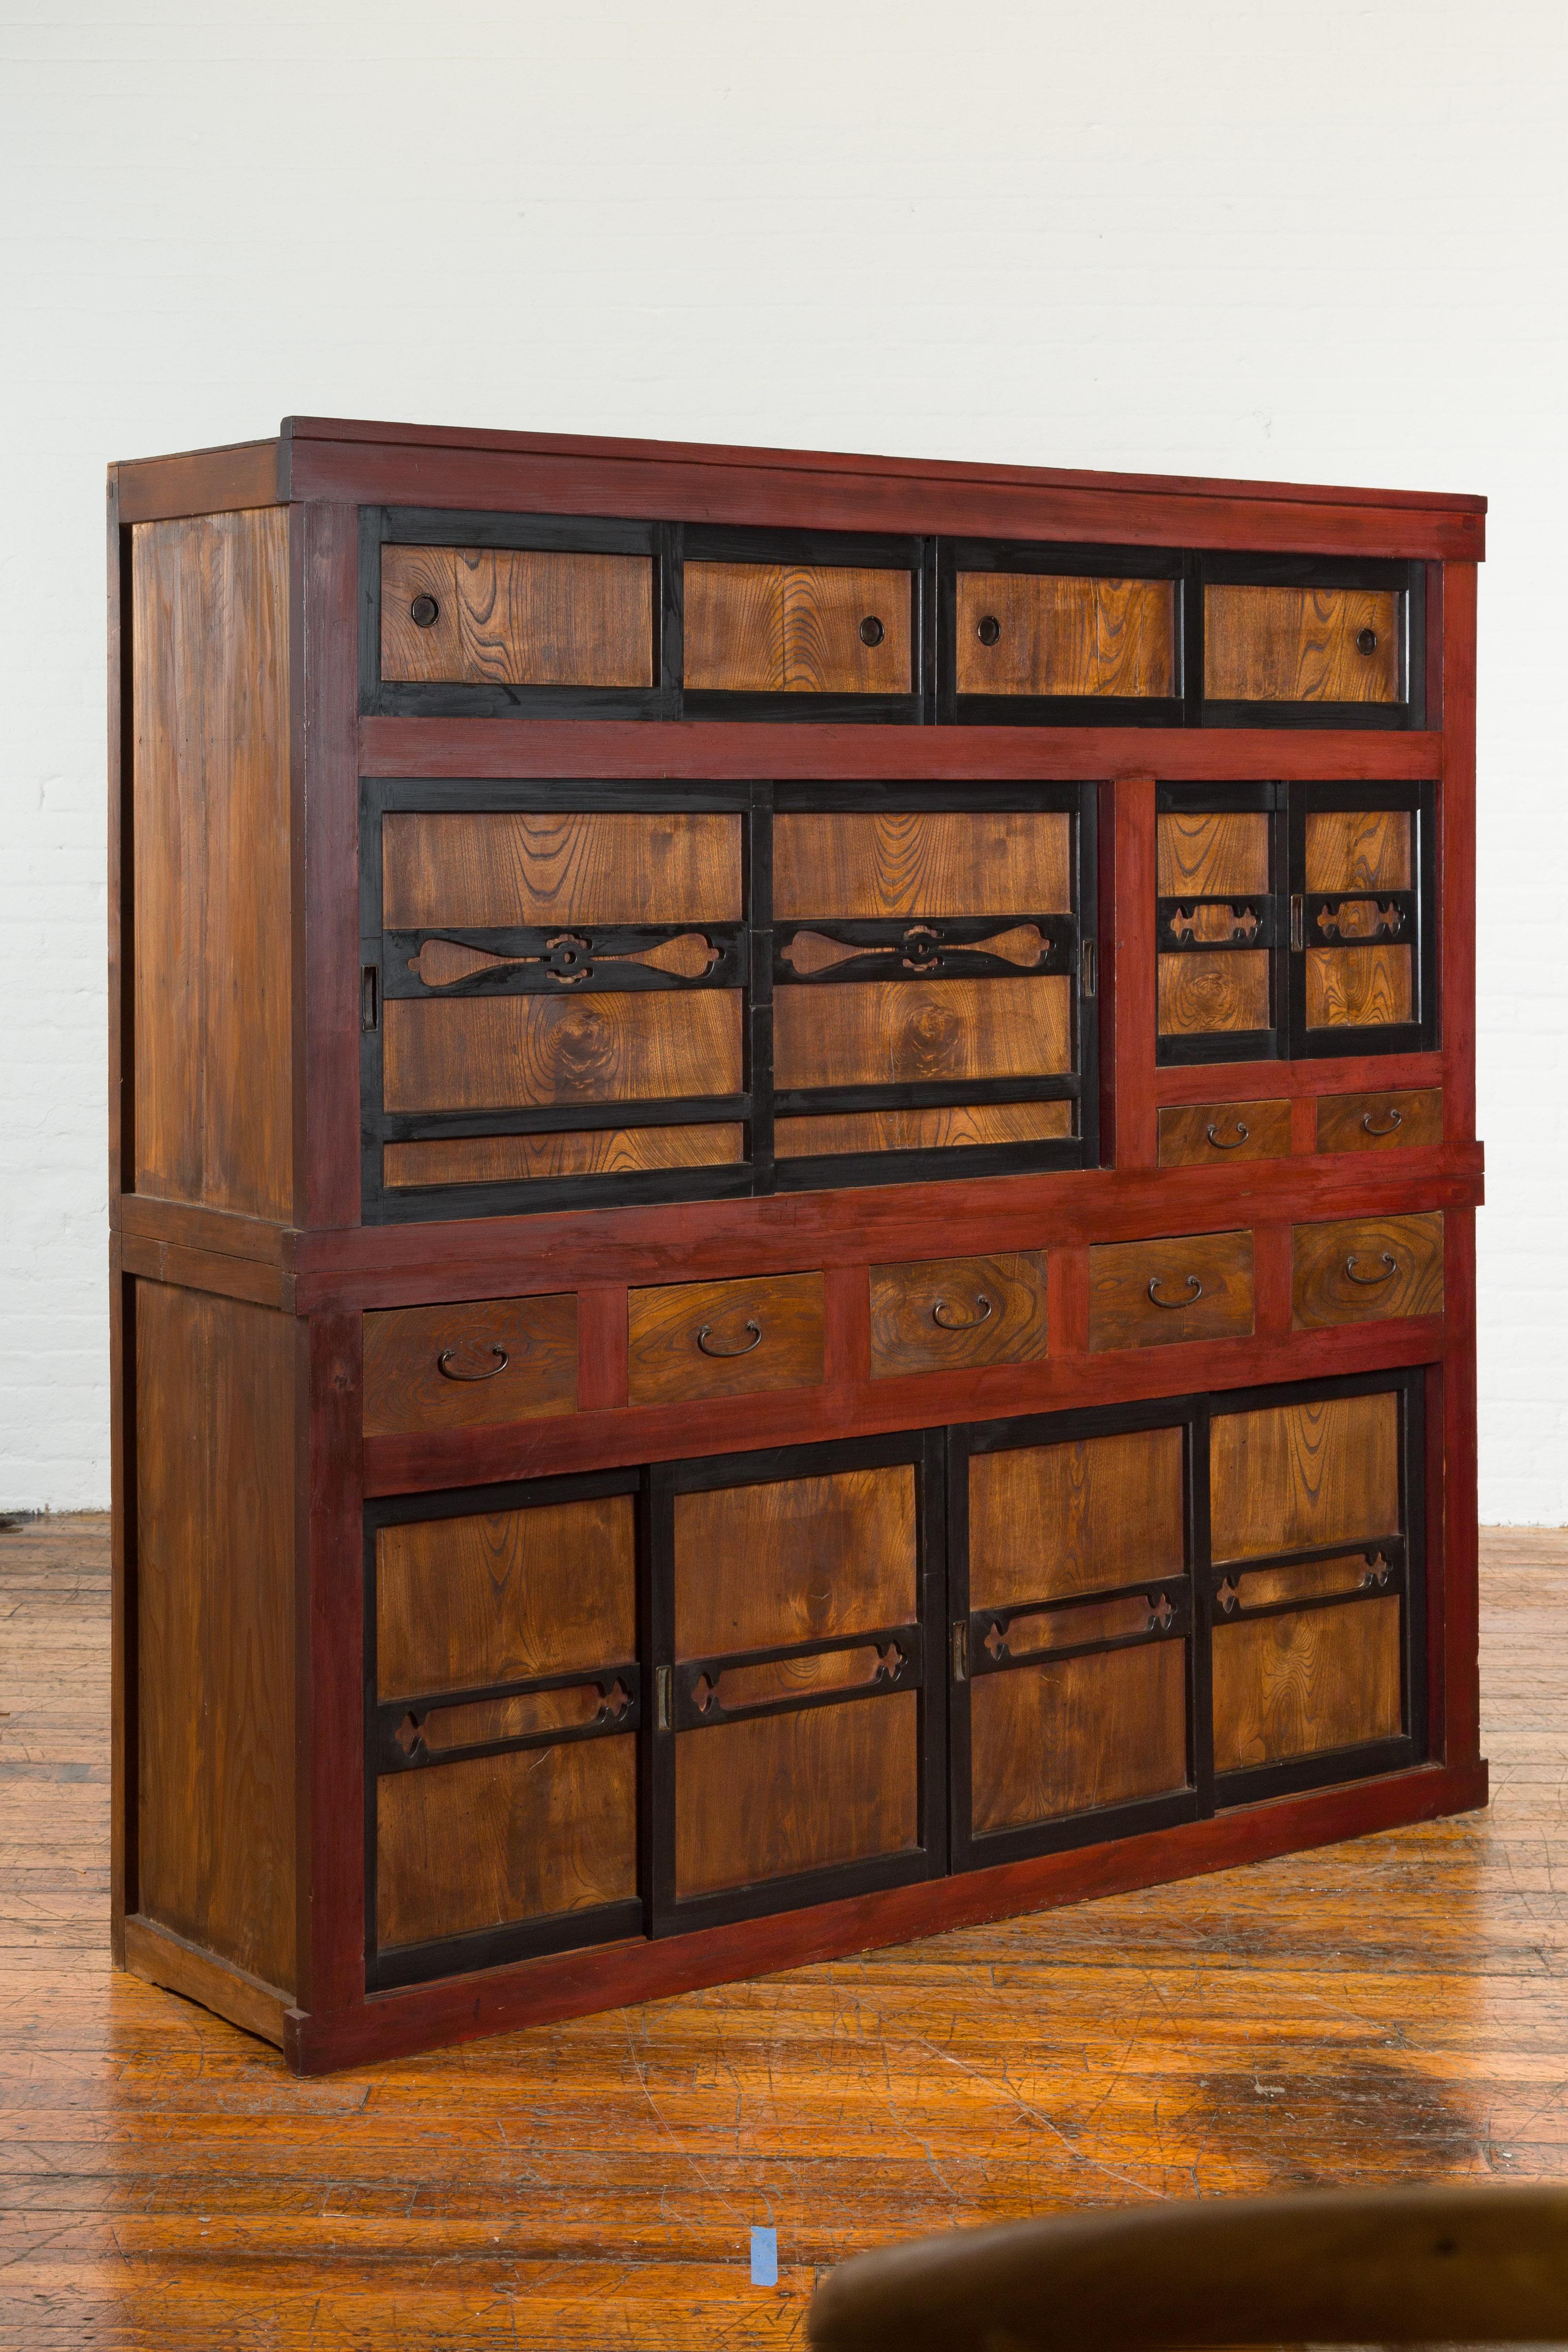 A large Japanese Meiji period kitchen cabinet from the early 20th century, with cinnabar and black patina and sliding doors with natural wood grain. Created in Japan during the Meiji period, this cabinet is great for dining room or kitchen storage!